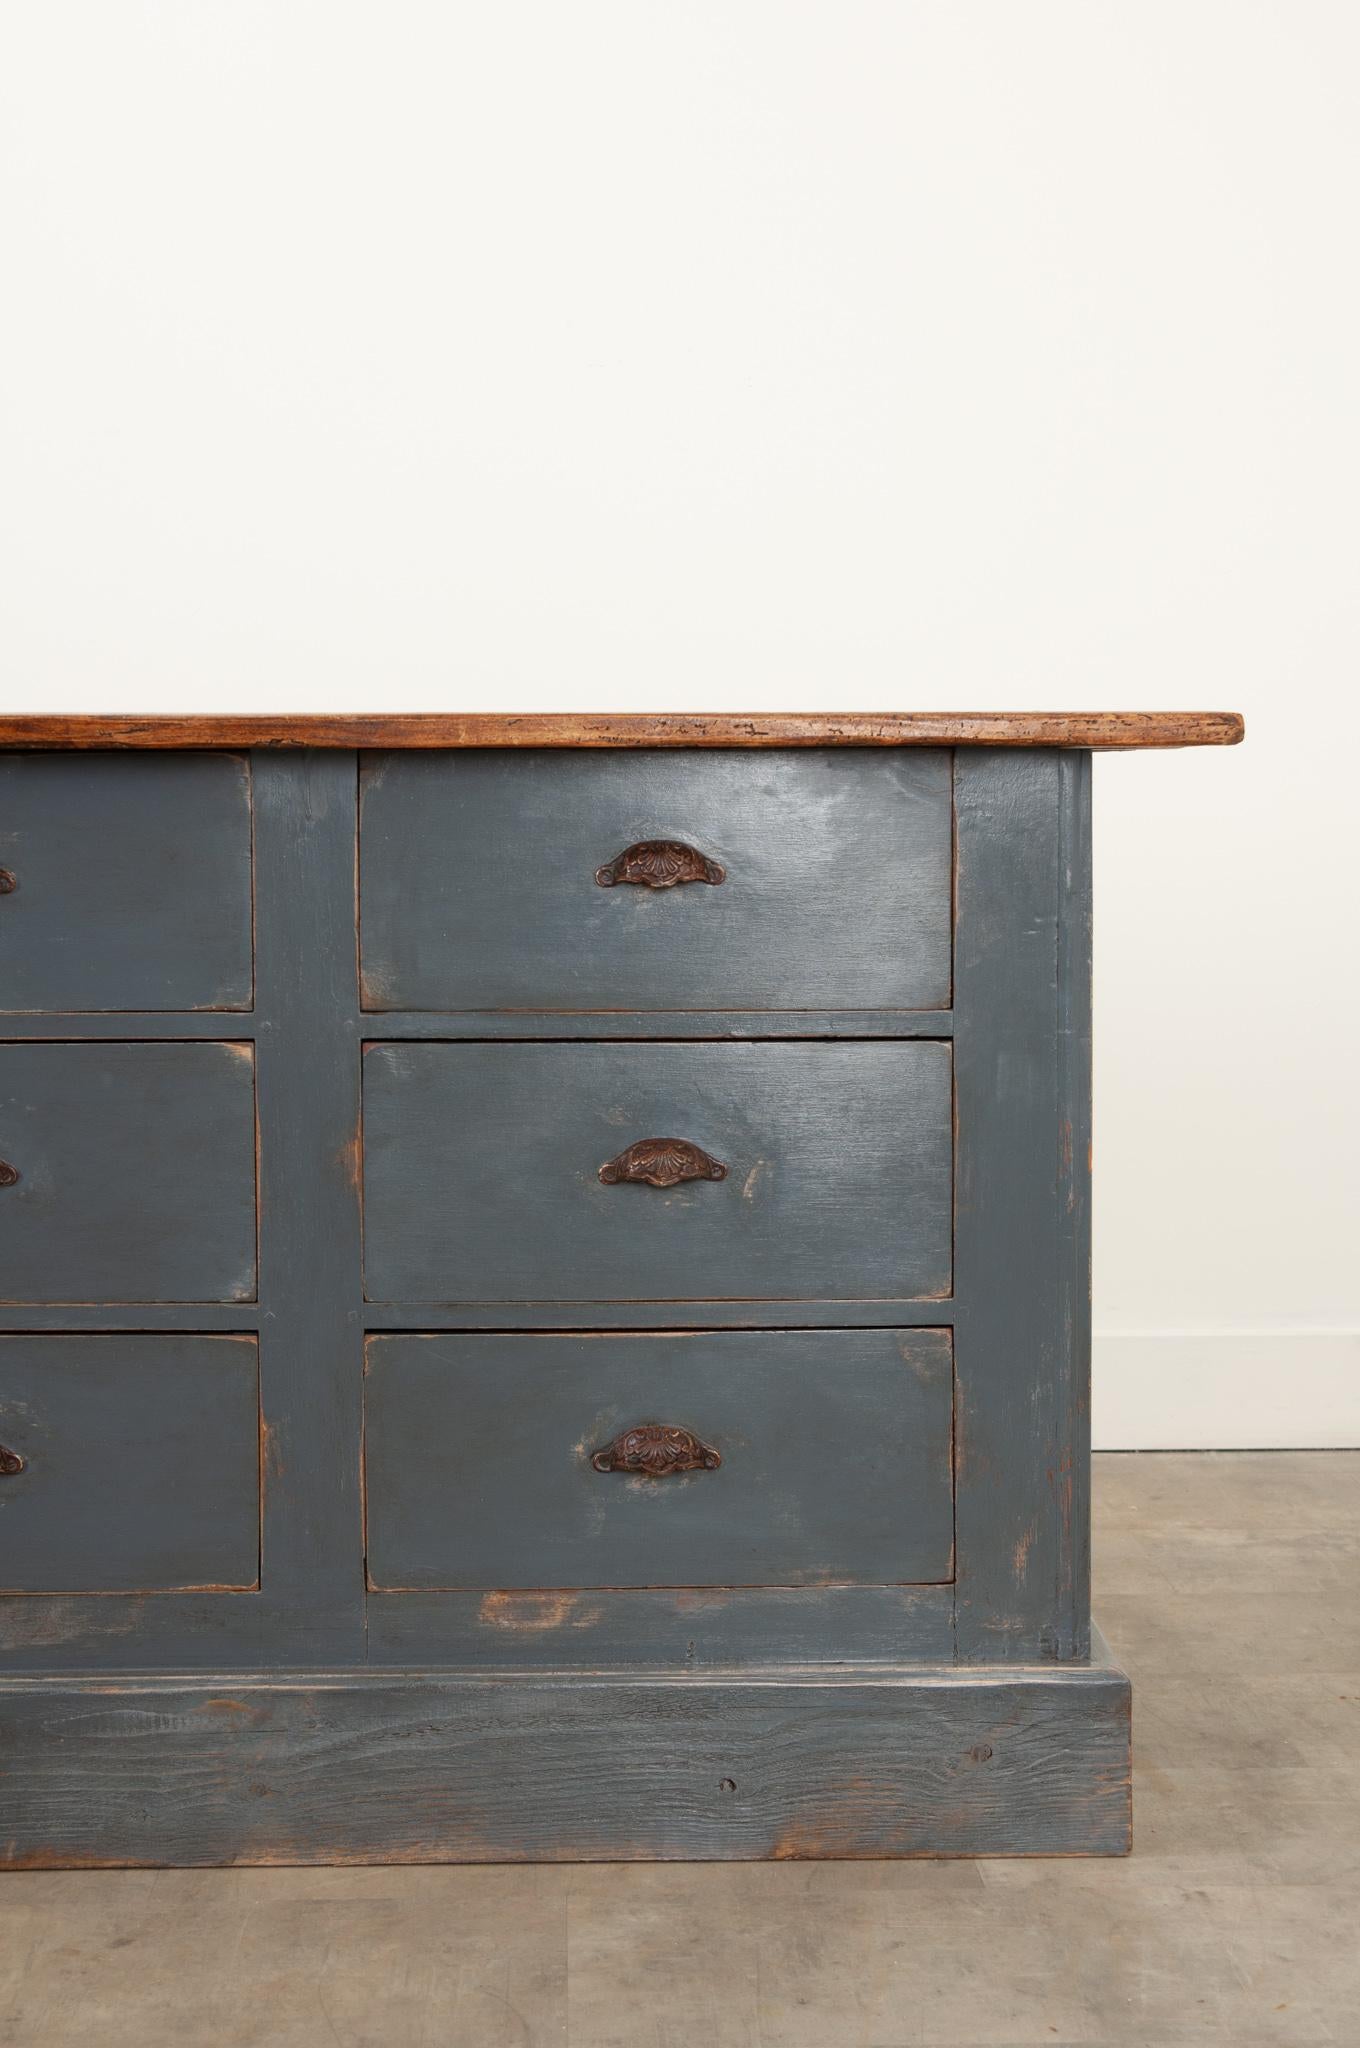 A large pine shop counter, sourced from a haberdasher in England. The counter dates to 1870 and has had a long career as a fully functional organizational case piece. The affixed countertop is made of three long boards of pine that showcase its rich